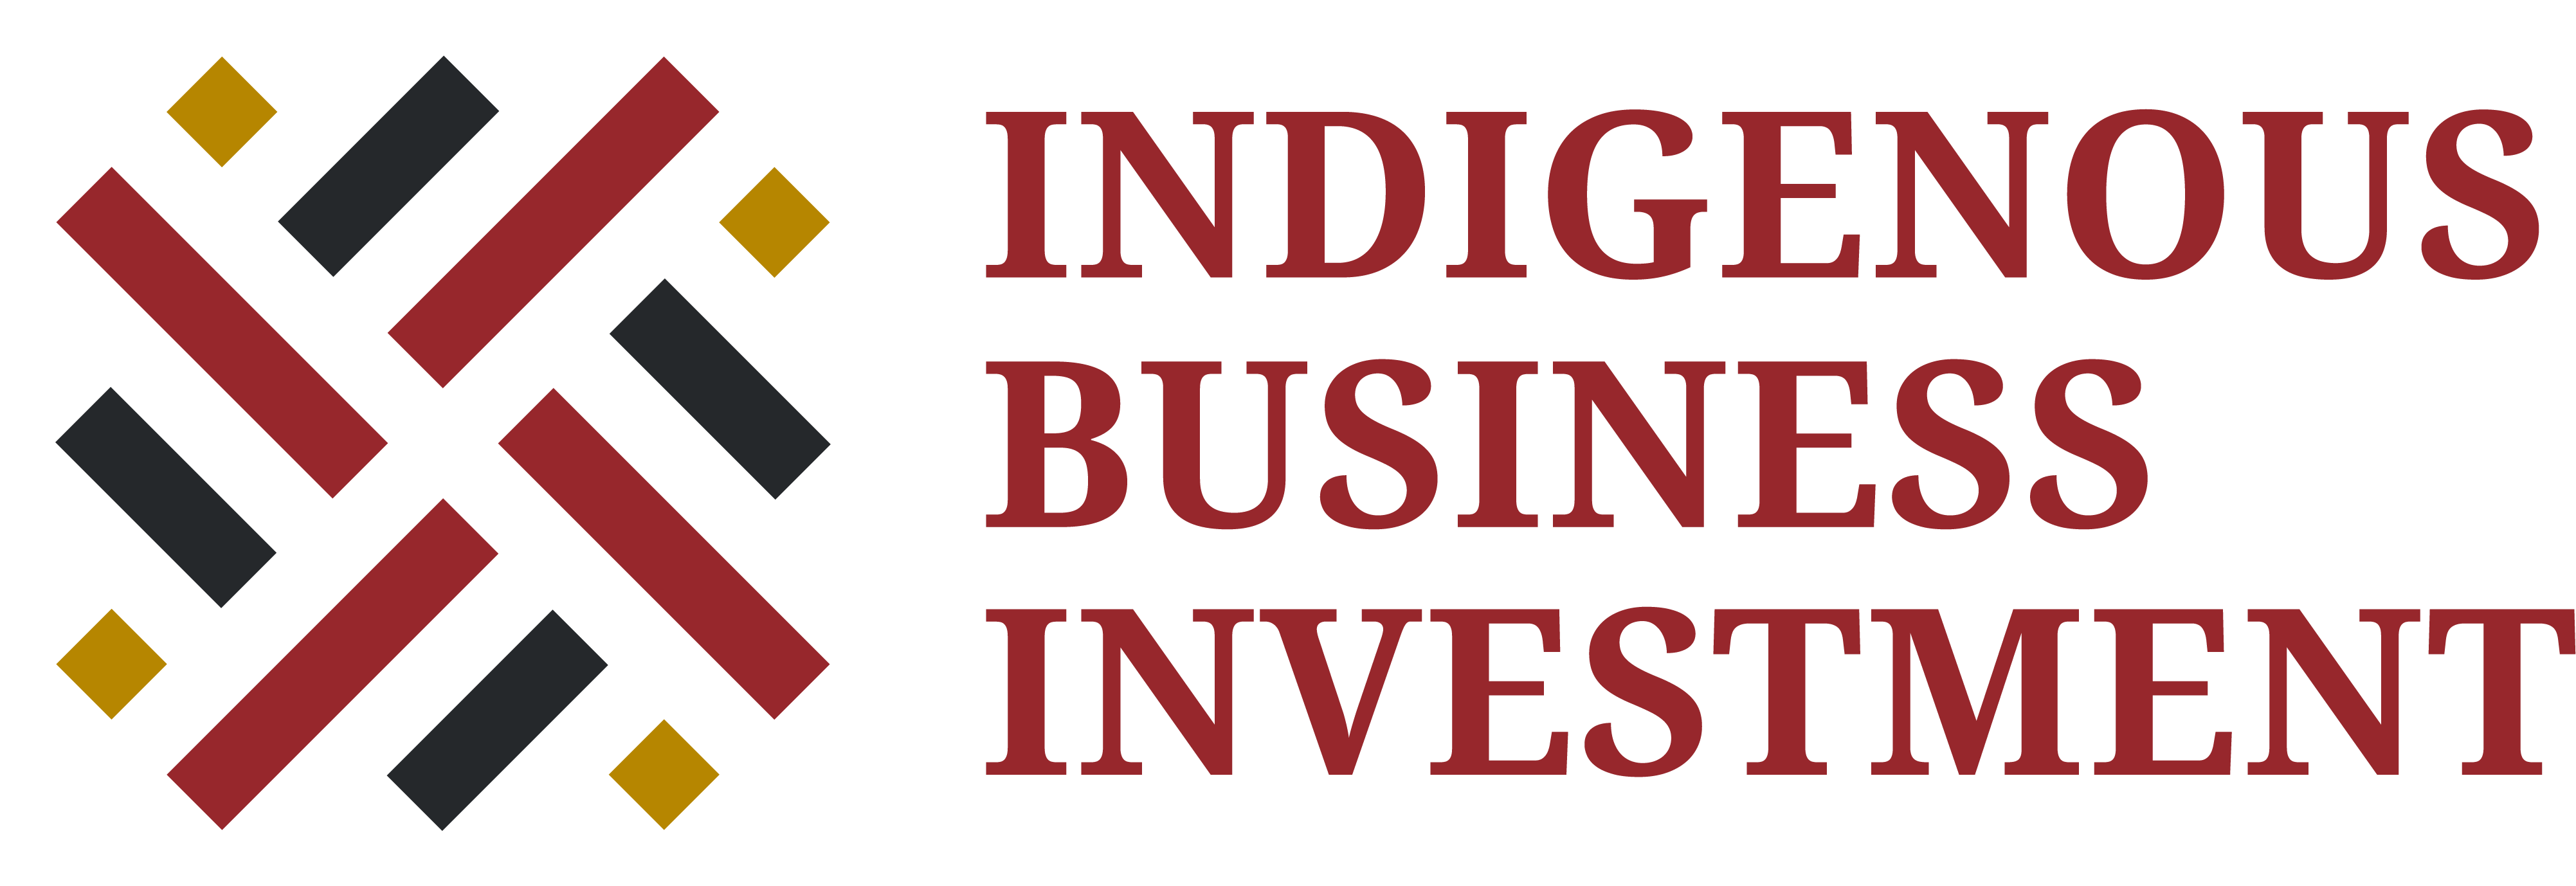 Indigenous Business Investment